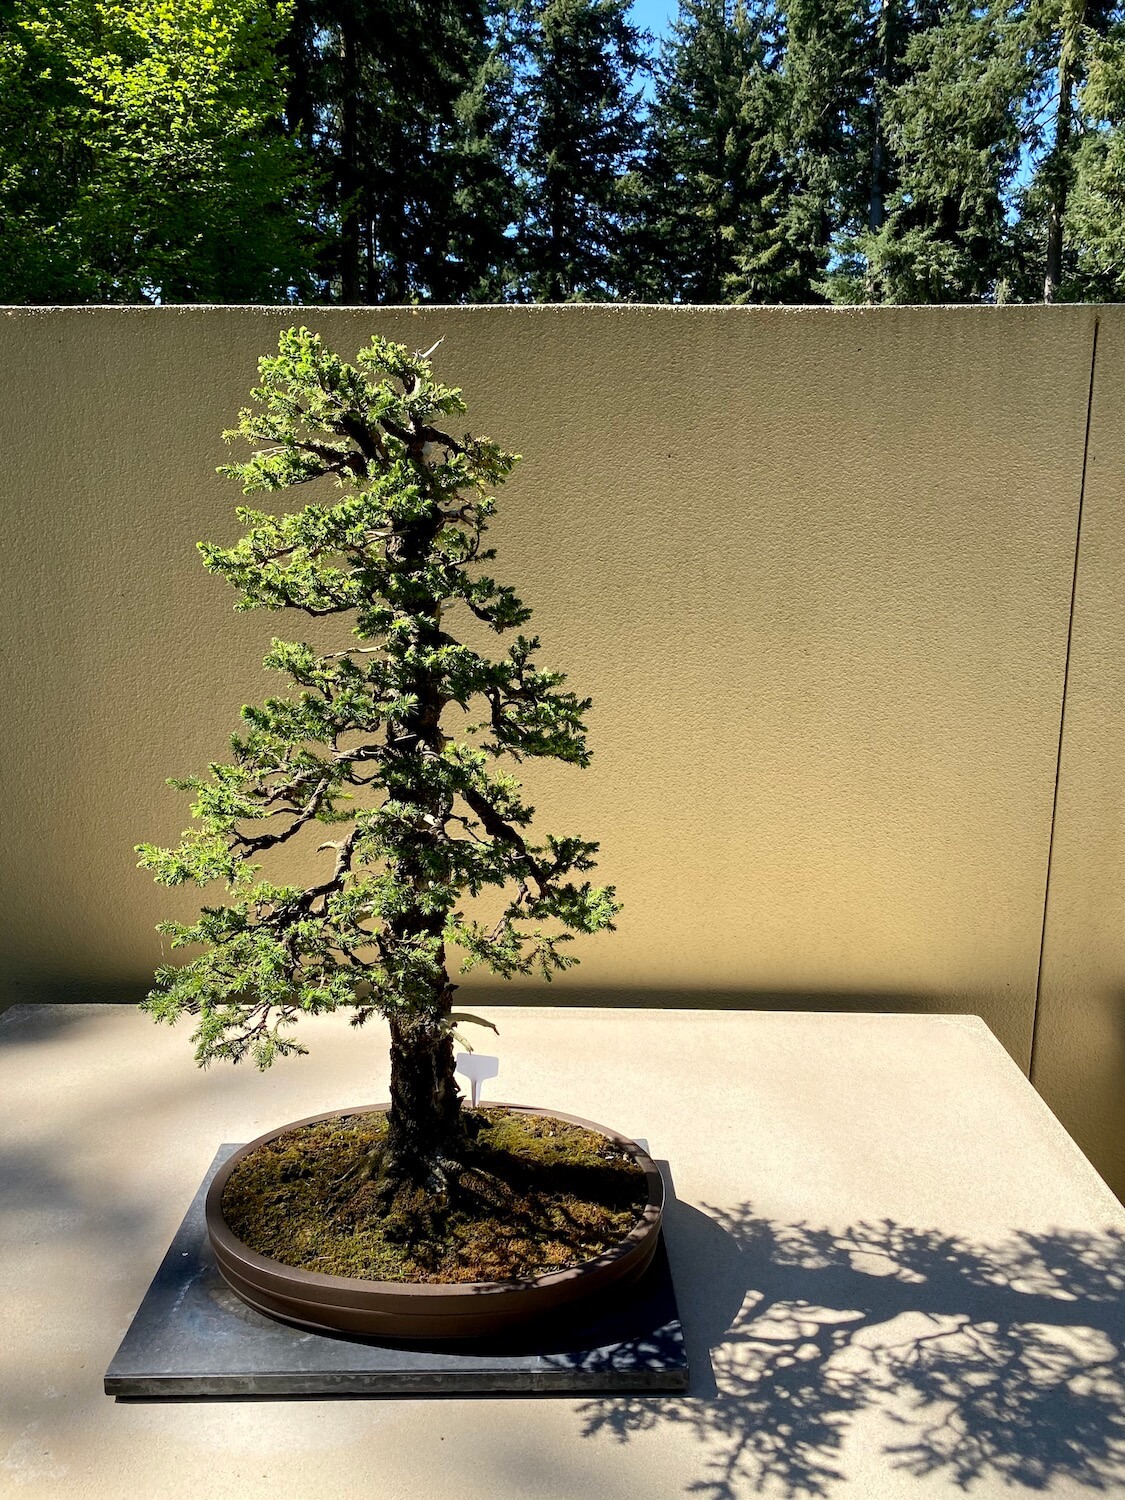 This shot shows the natural surrounding of the the Pacific Bonsai Museum, as this miniature white pine tree reaches up to the giant fir trees above.  The branches push out greenish pine needles as the round base is surrounded by tight green moss.  